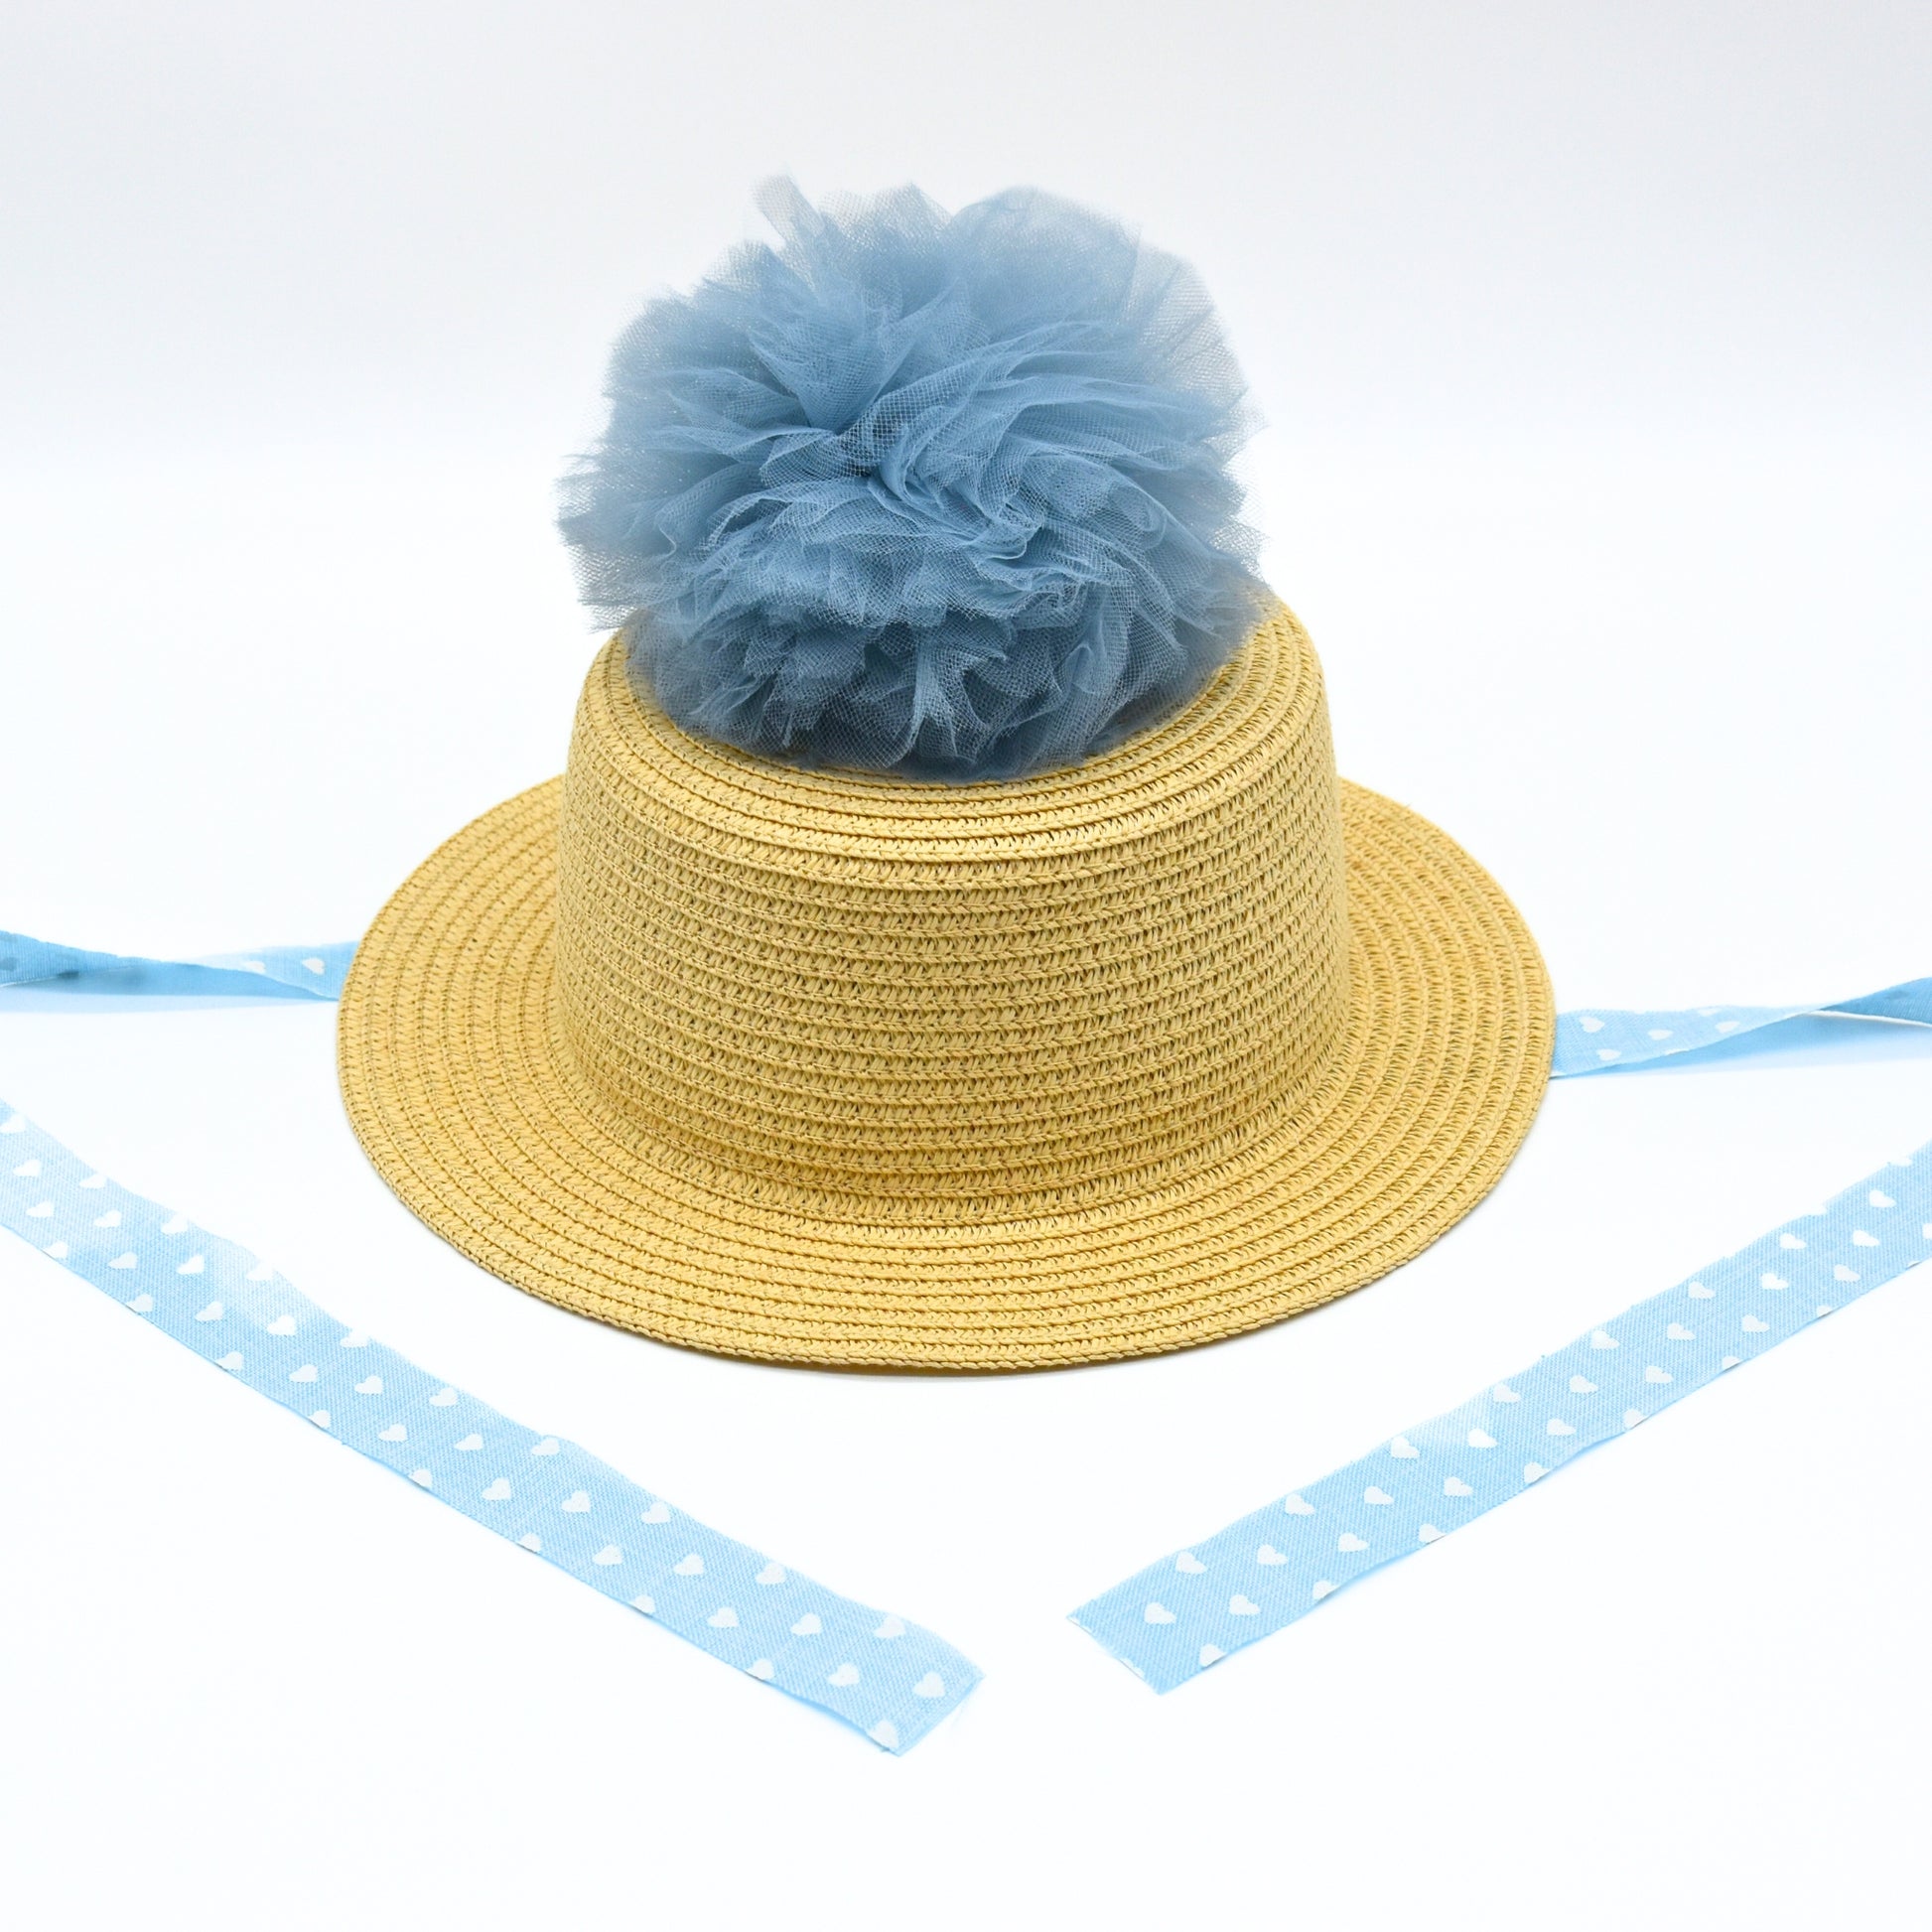 Straw Boater Hat with Blue Pompom for Women